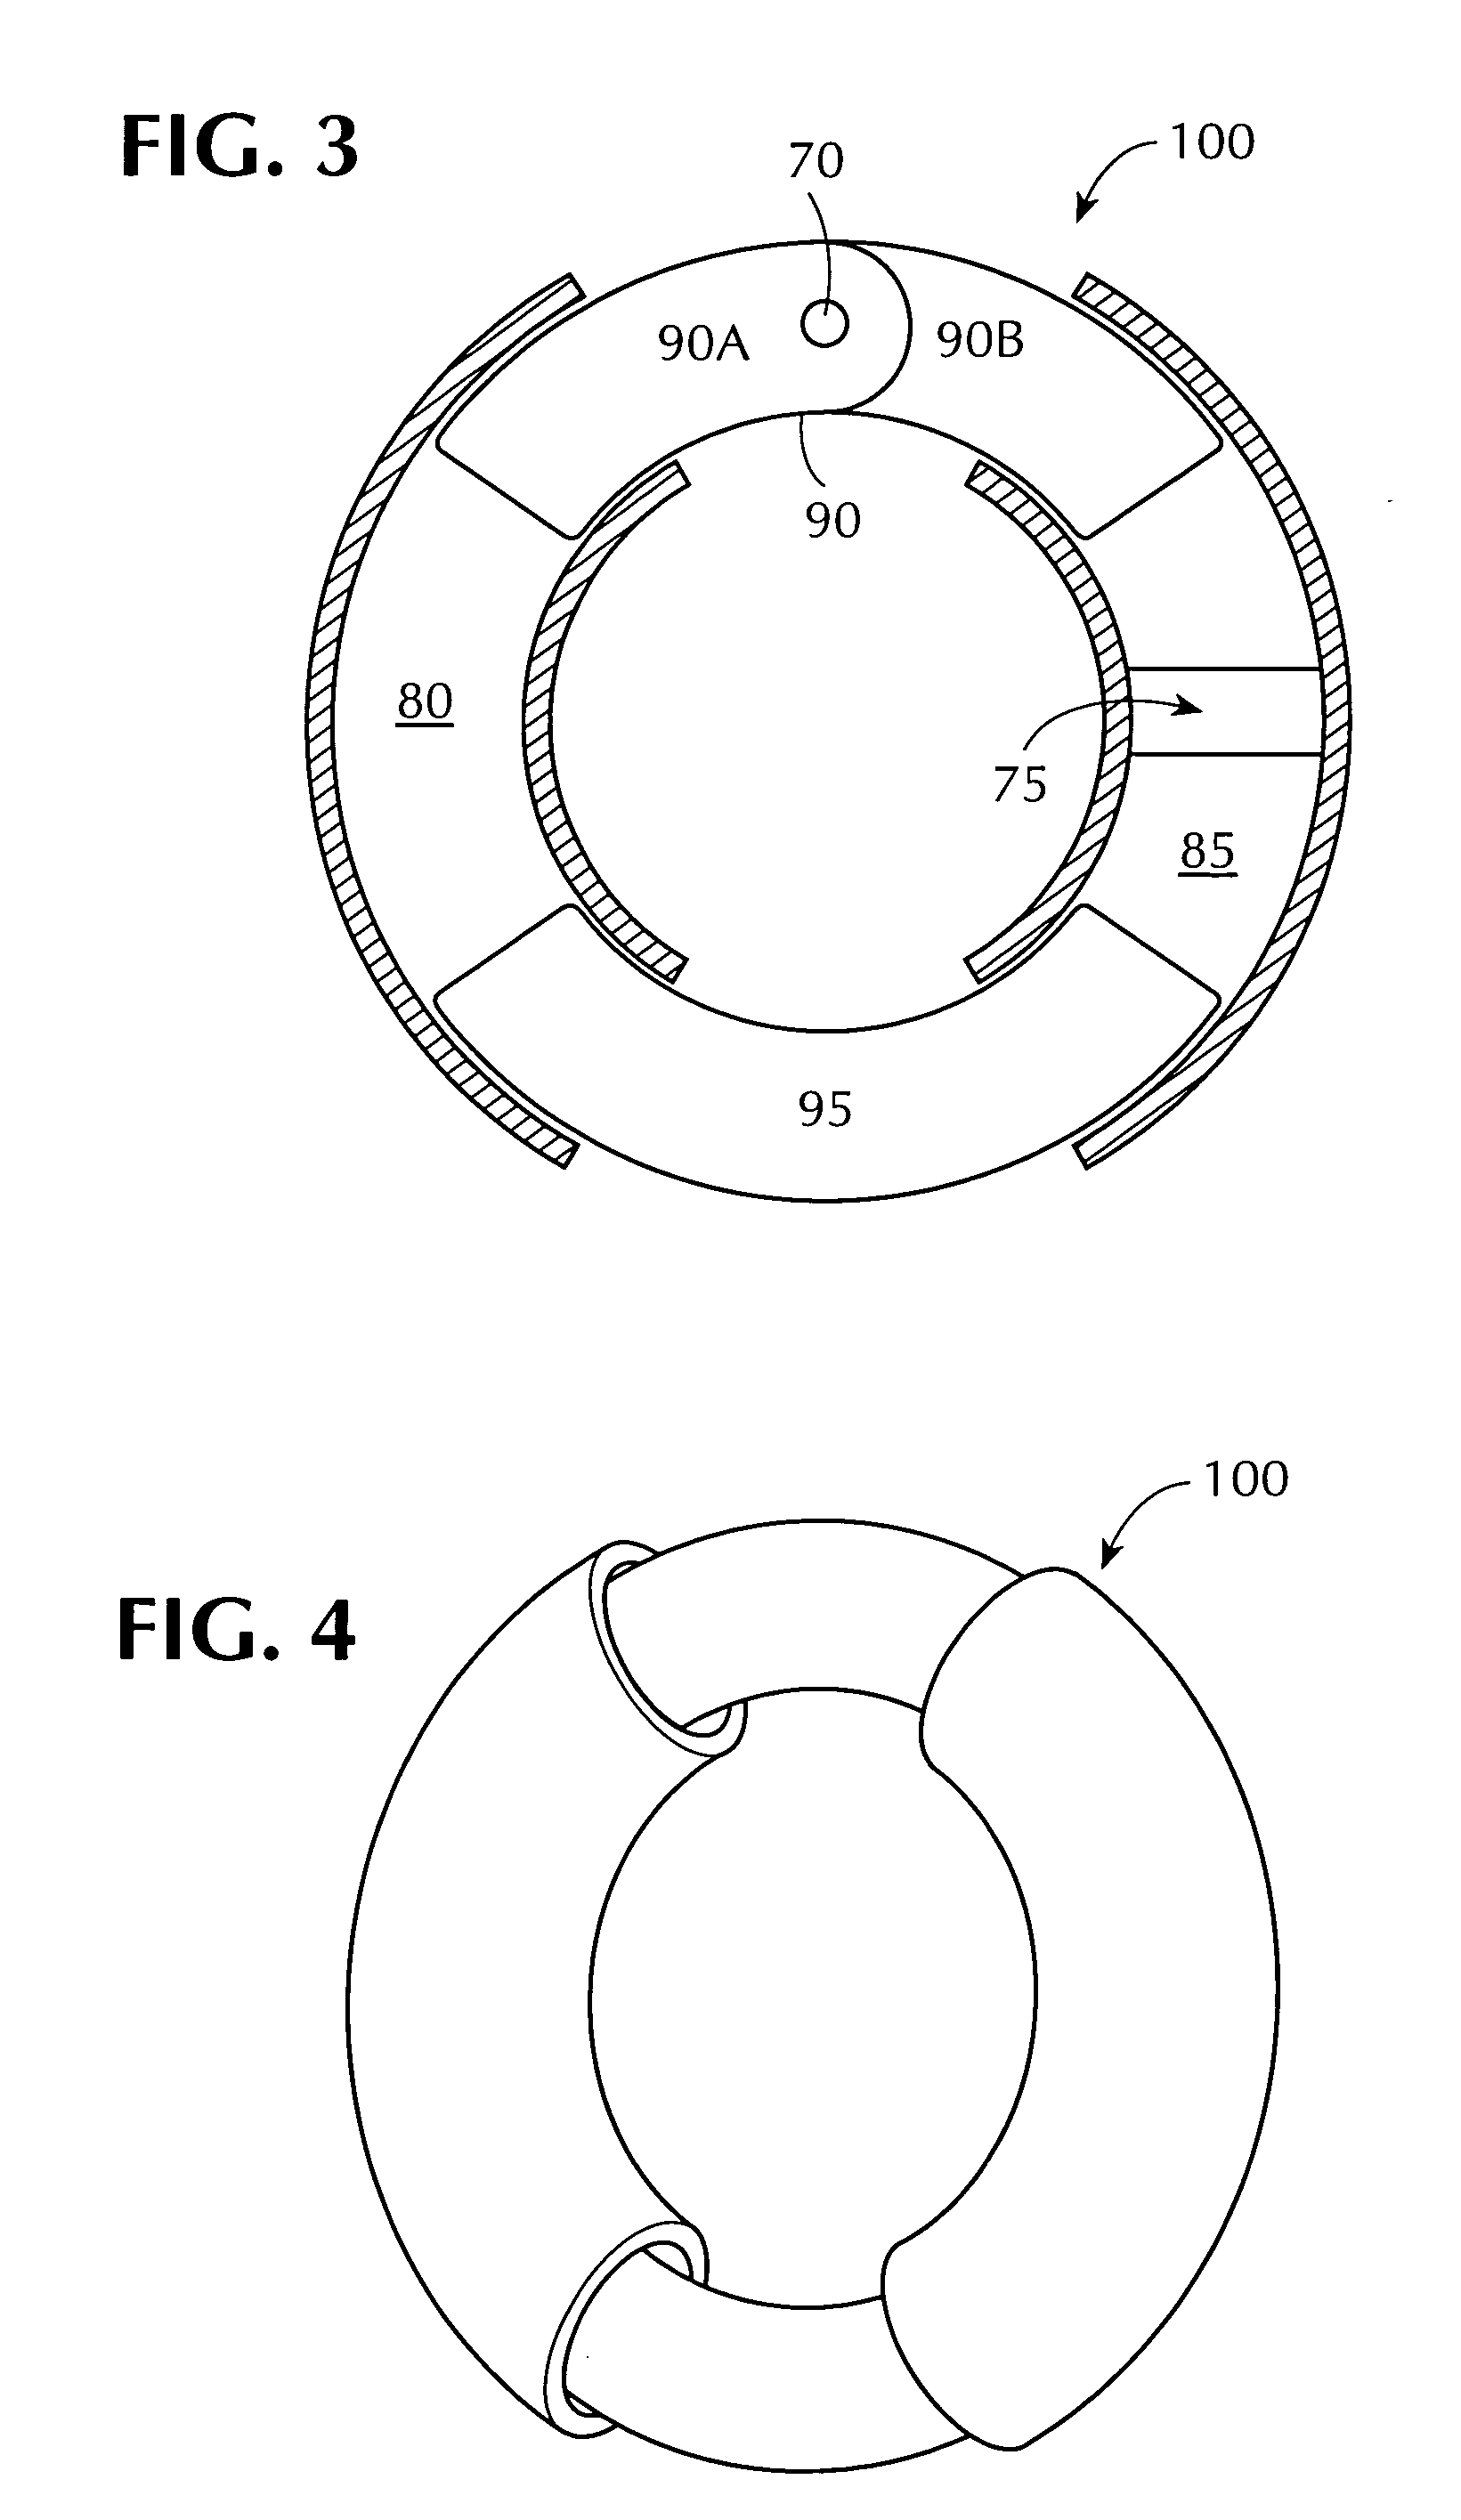 Magnetically attractable components for self-sizing jewelry articles